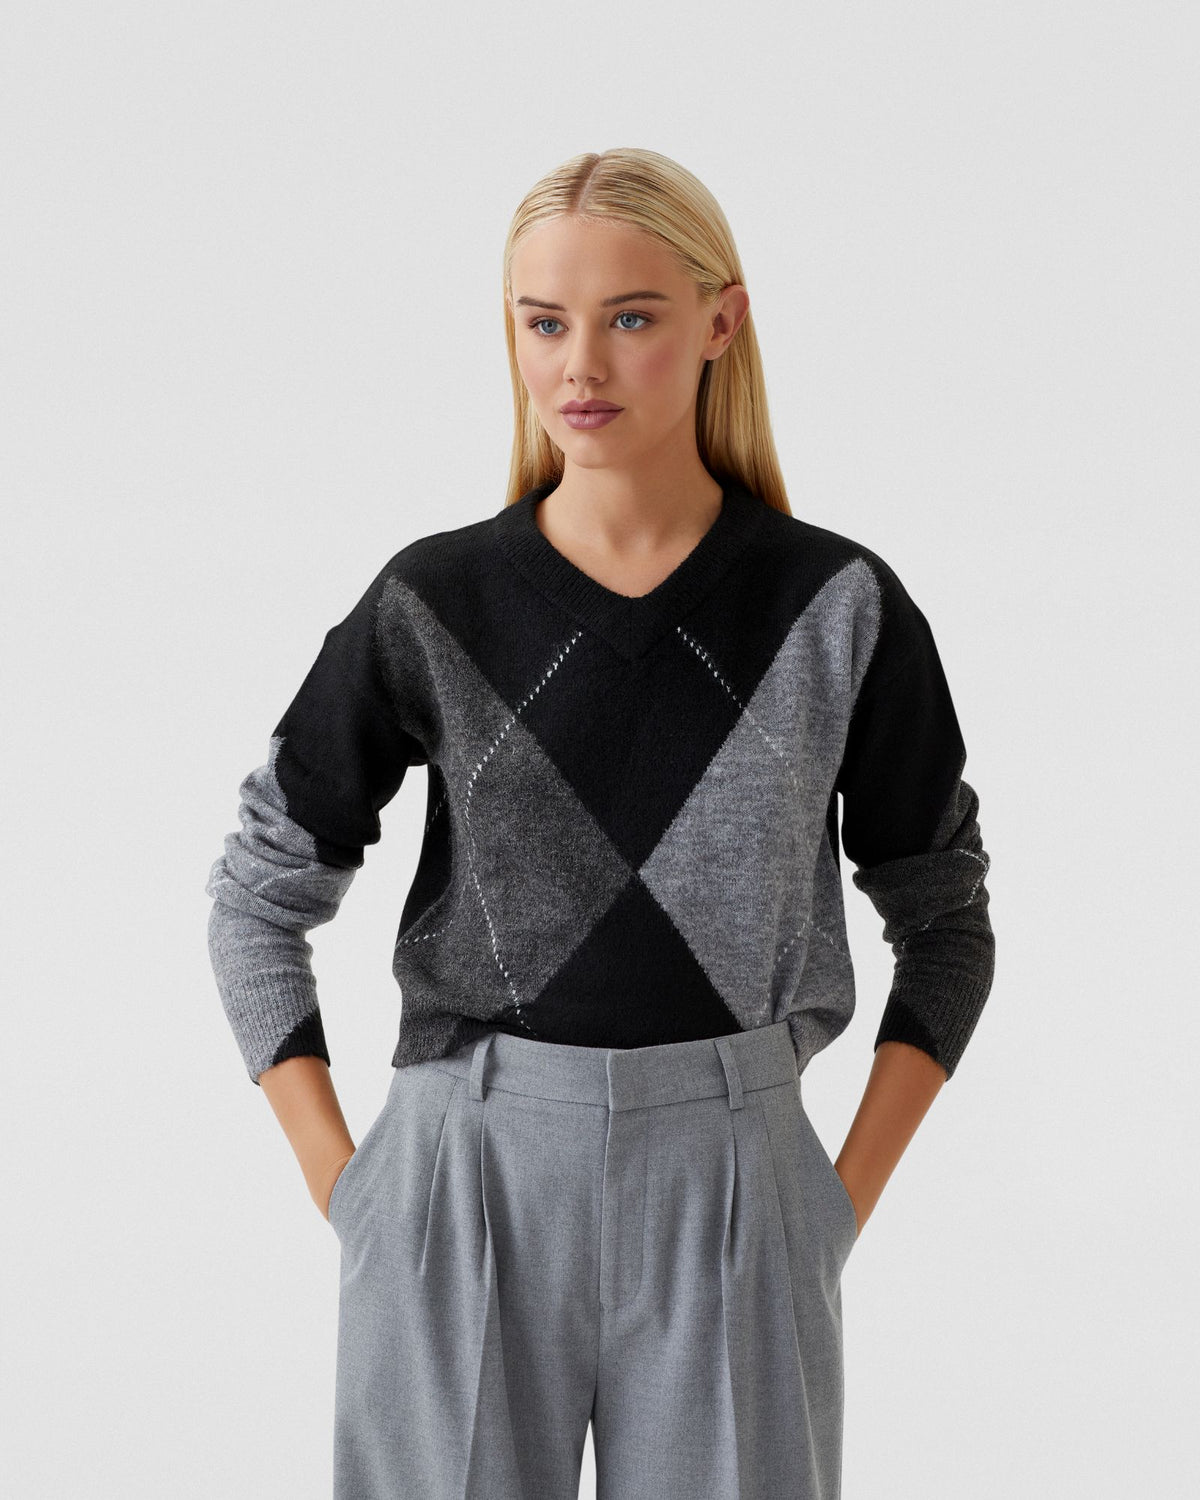 LOWEN ARGYLE V-NECK KNIT - AVAILABLE ~ 1-2 weeks WOMENS KNITWEAR